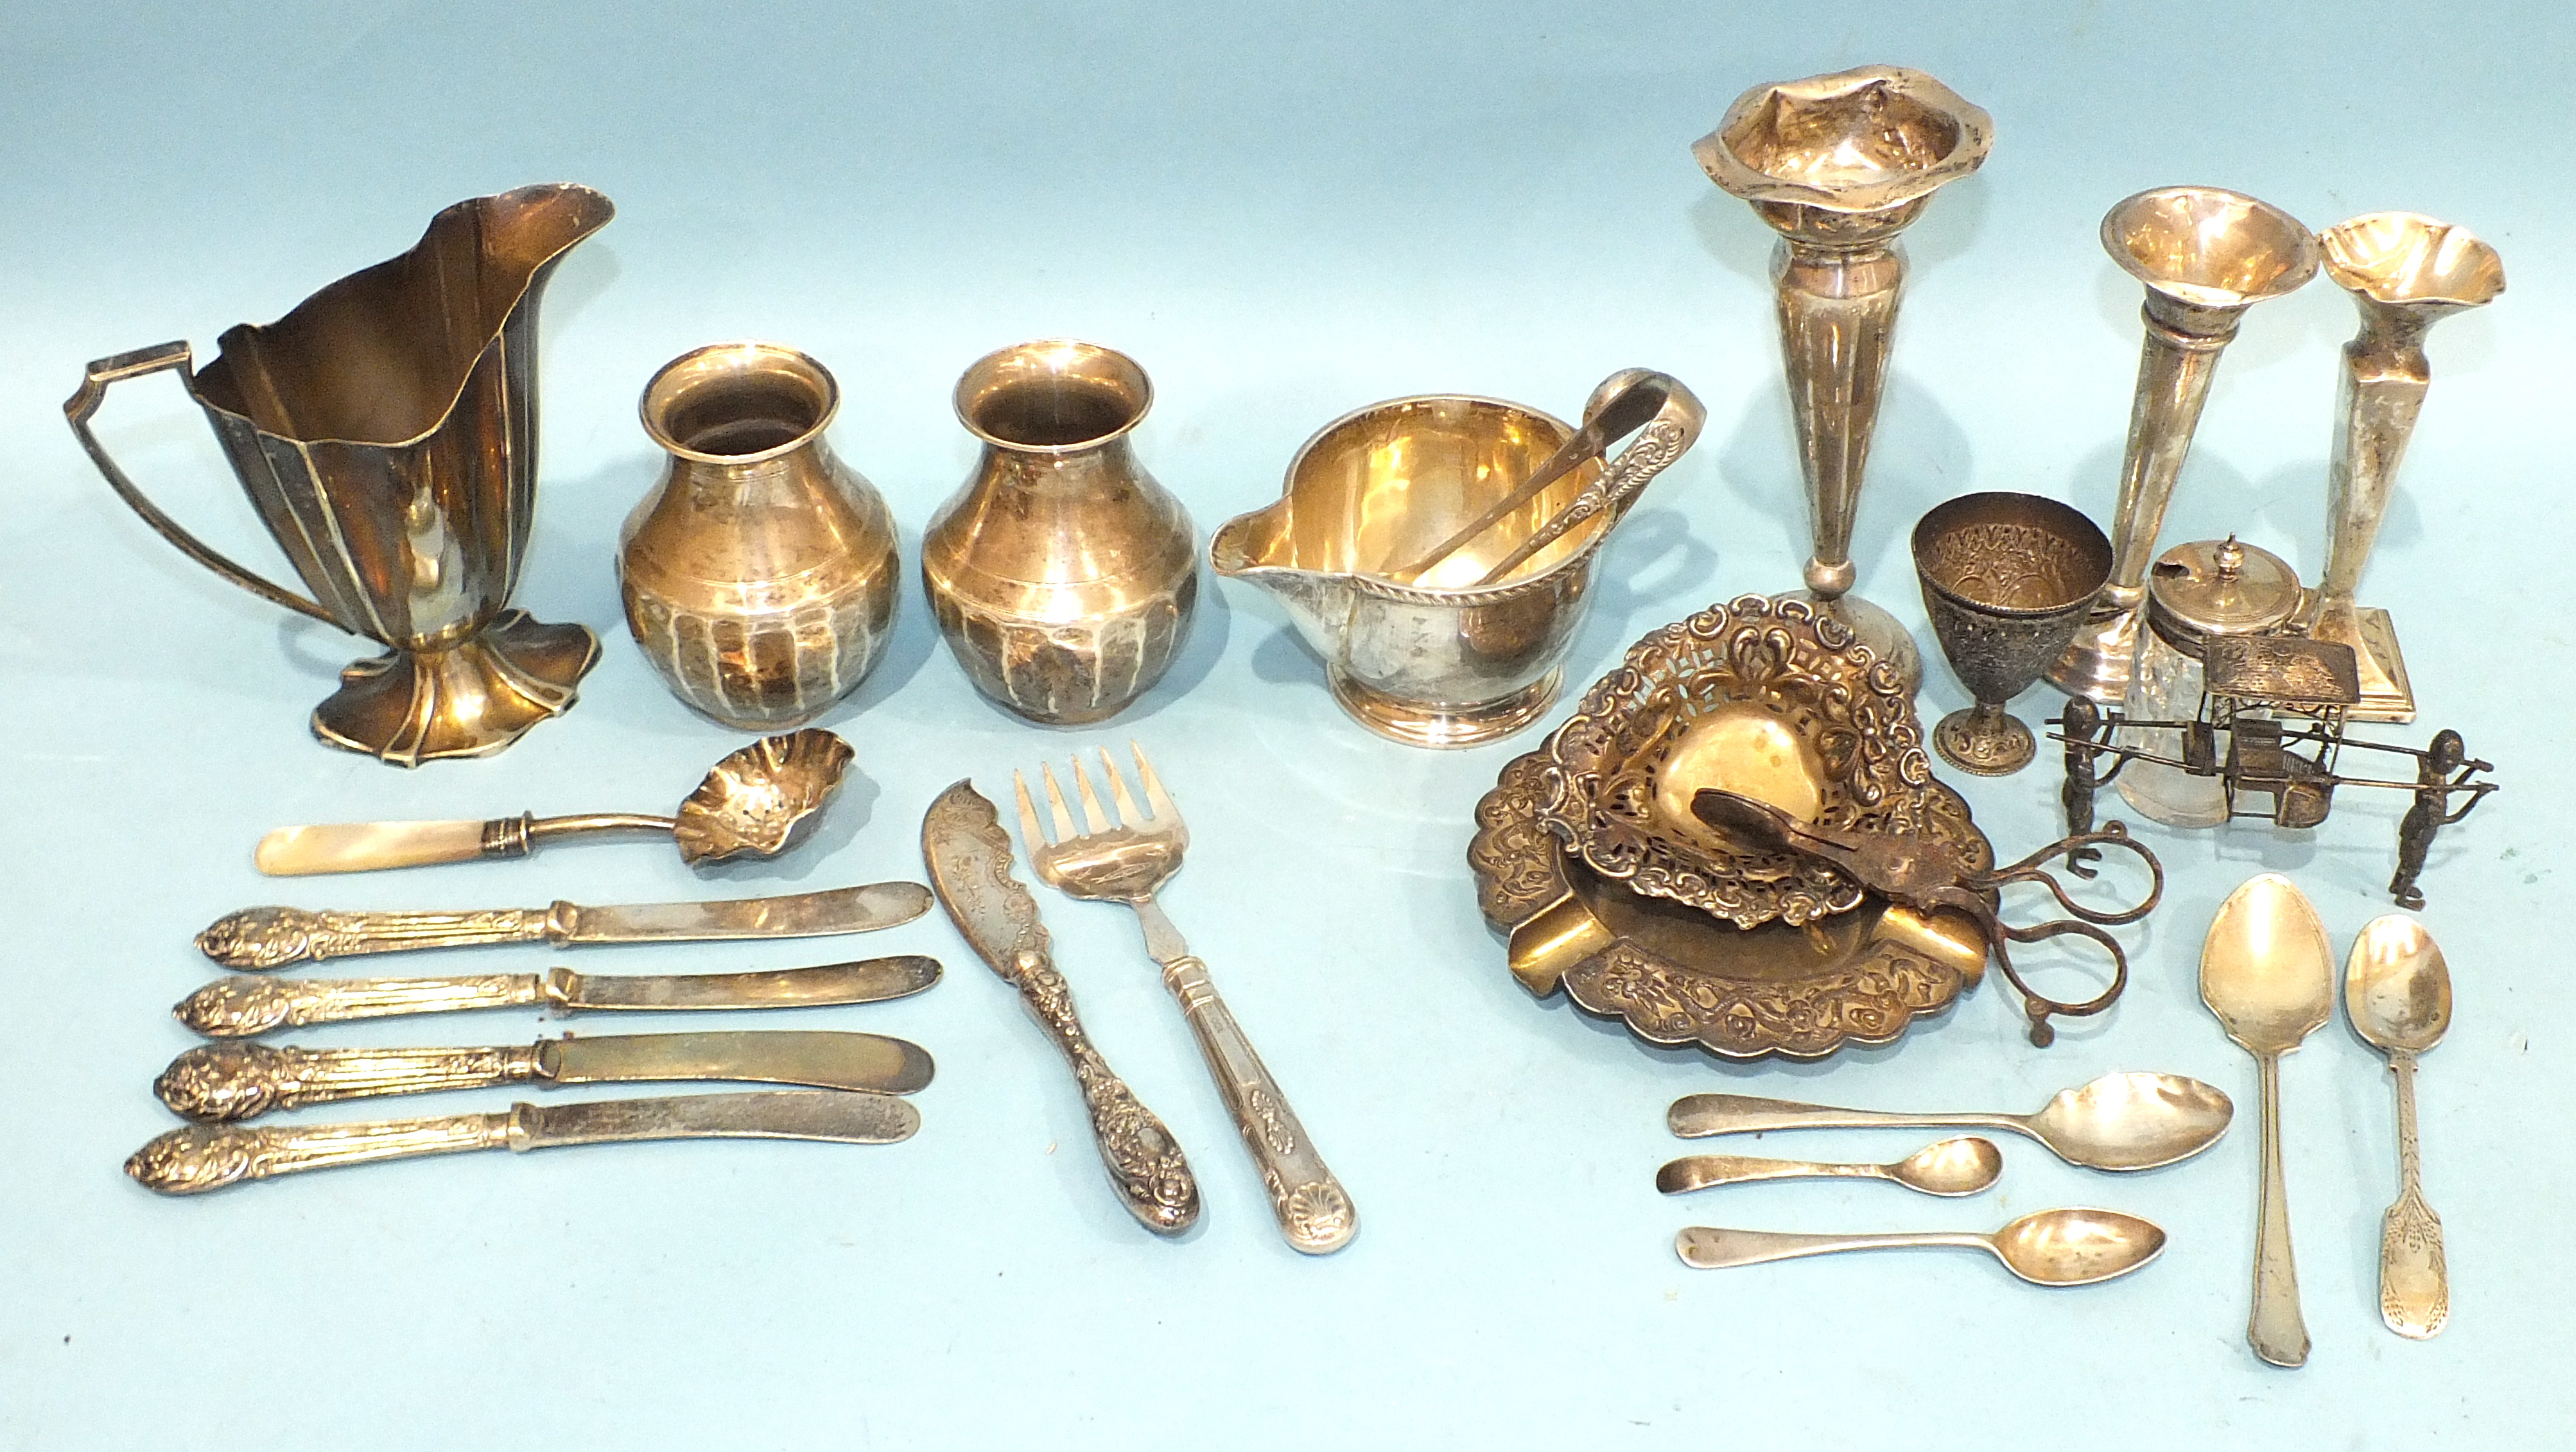 A Chinese silver ashtray, (damaged), various small silver items, metalware and a miscellany.